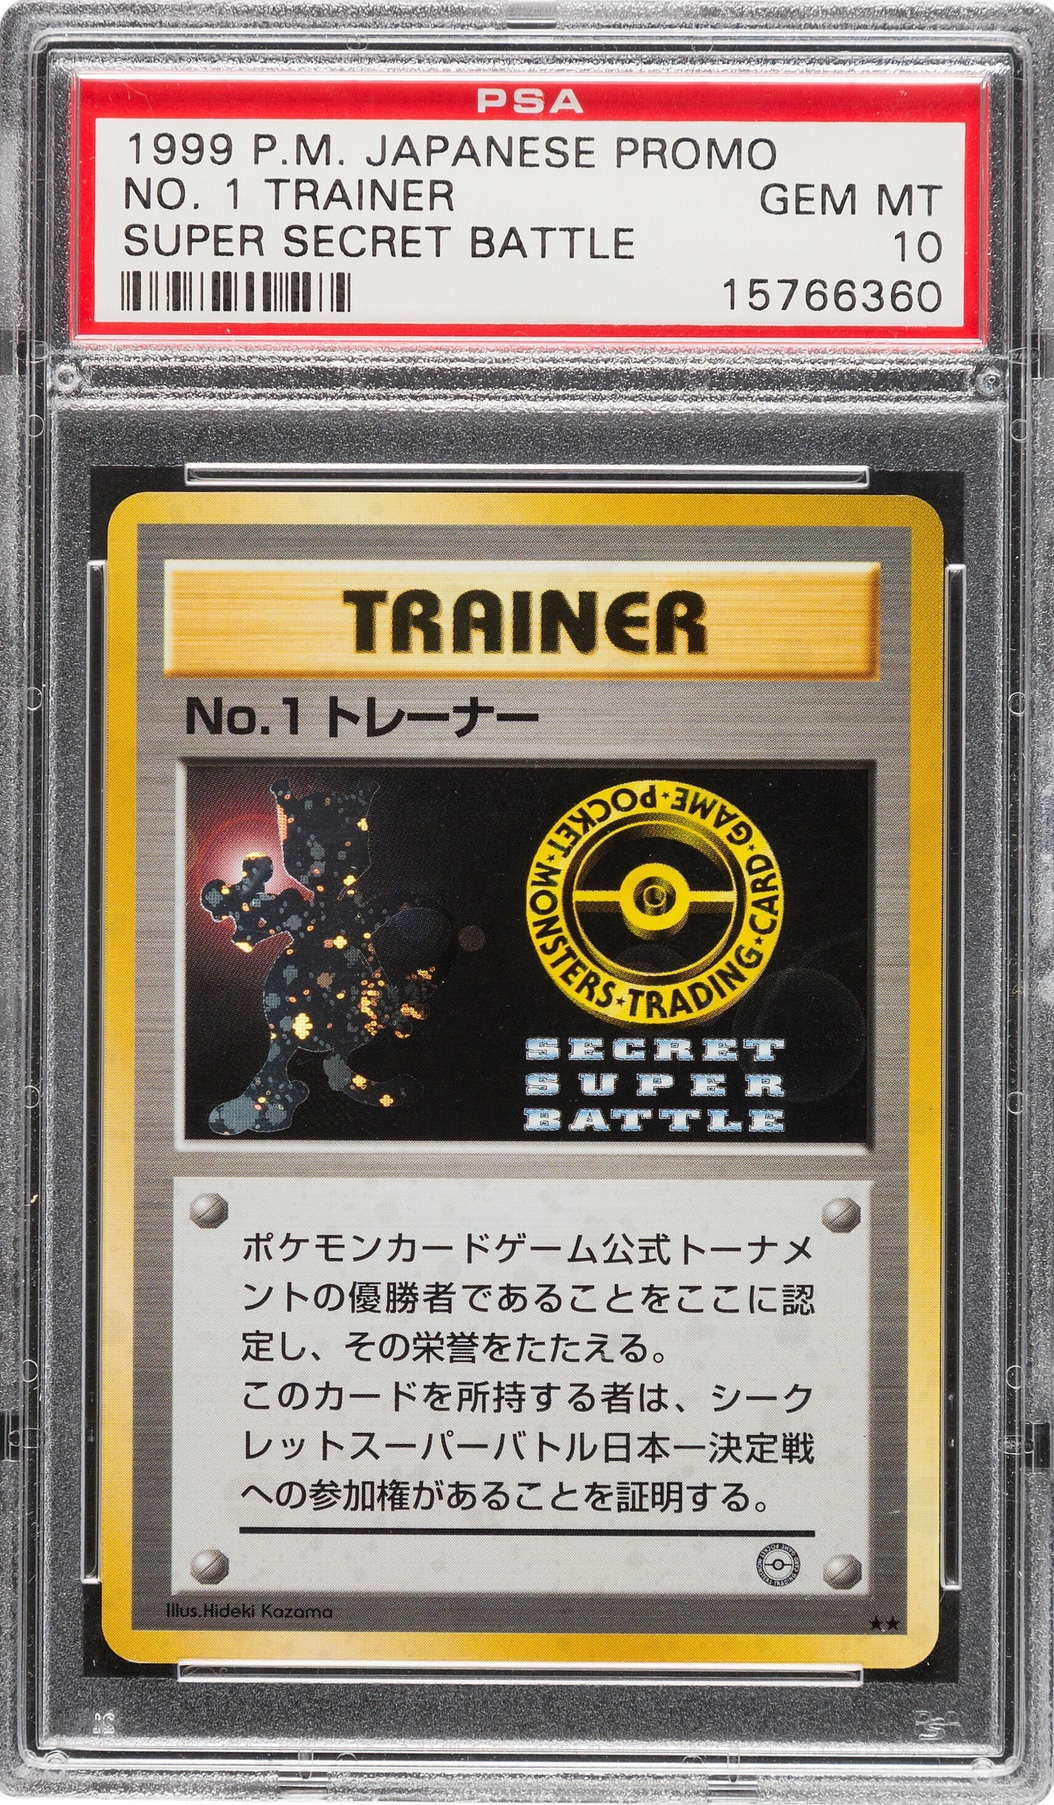 This Pokémon TCG Pikachu Illustrator Promo Card Sells for $840,000 USD at  Auction